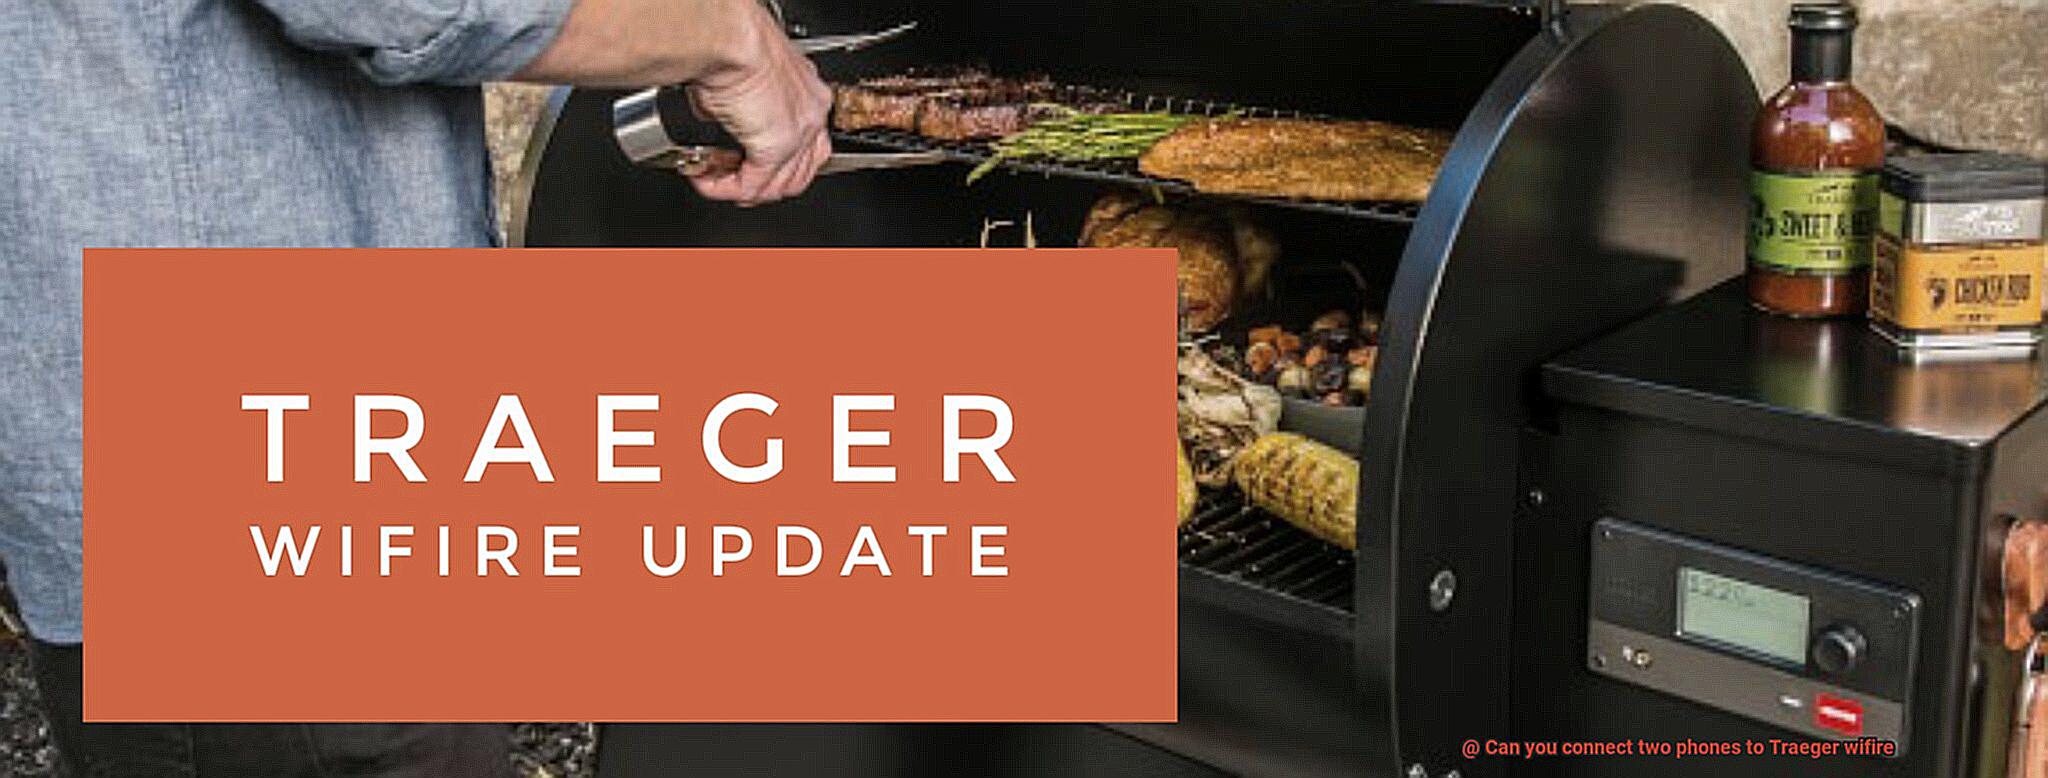 Can you connect two phones to Traeger wifire-2